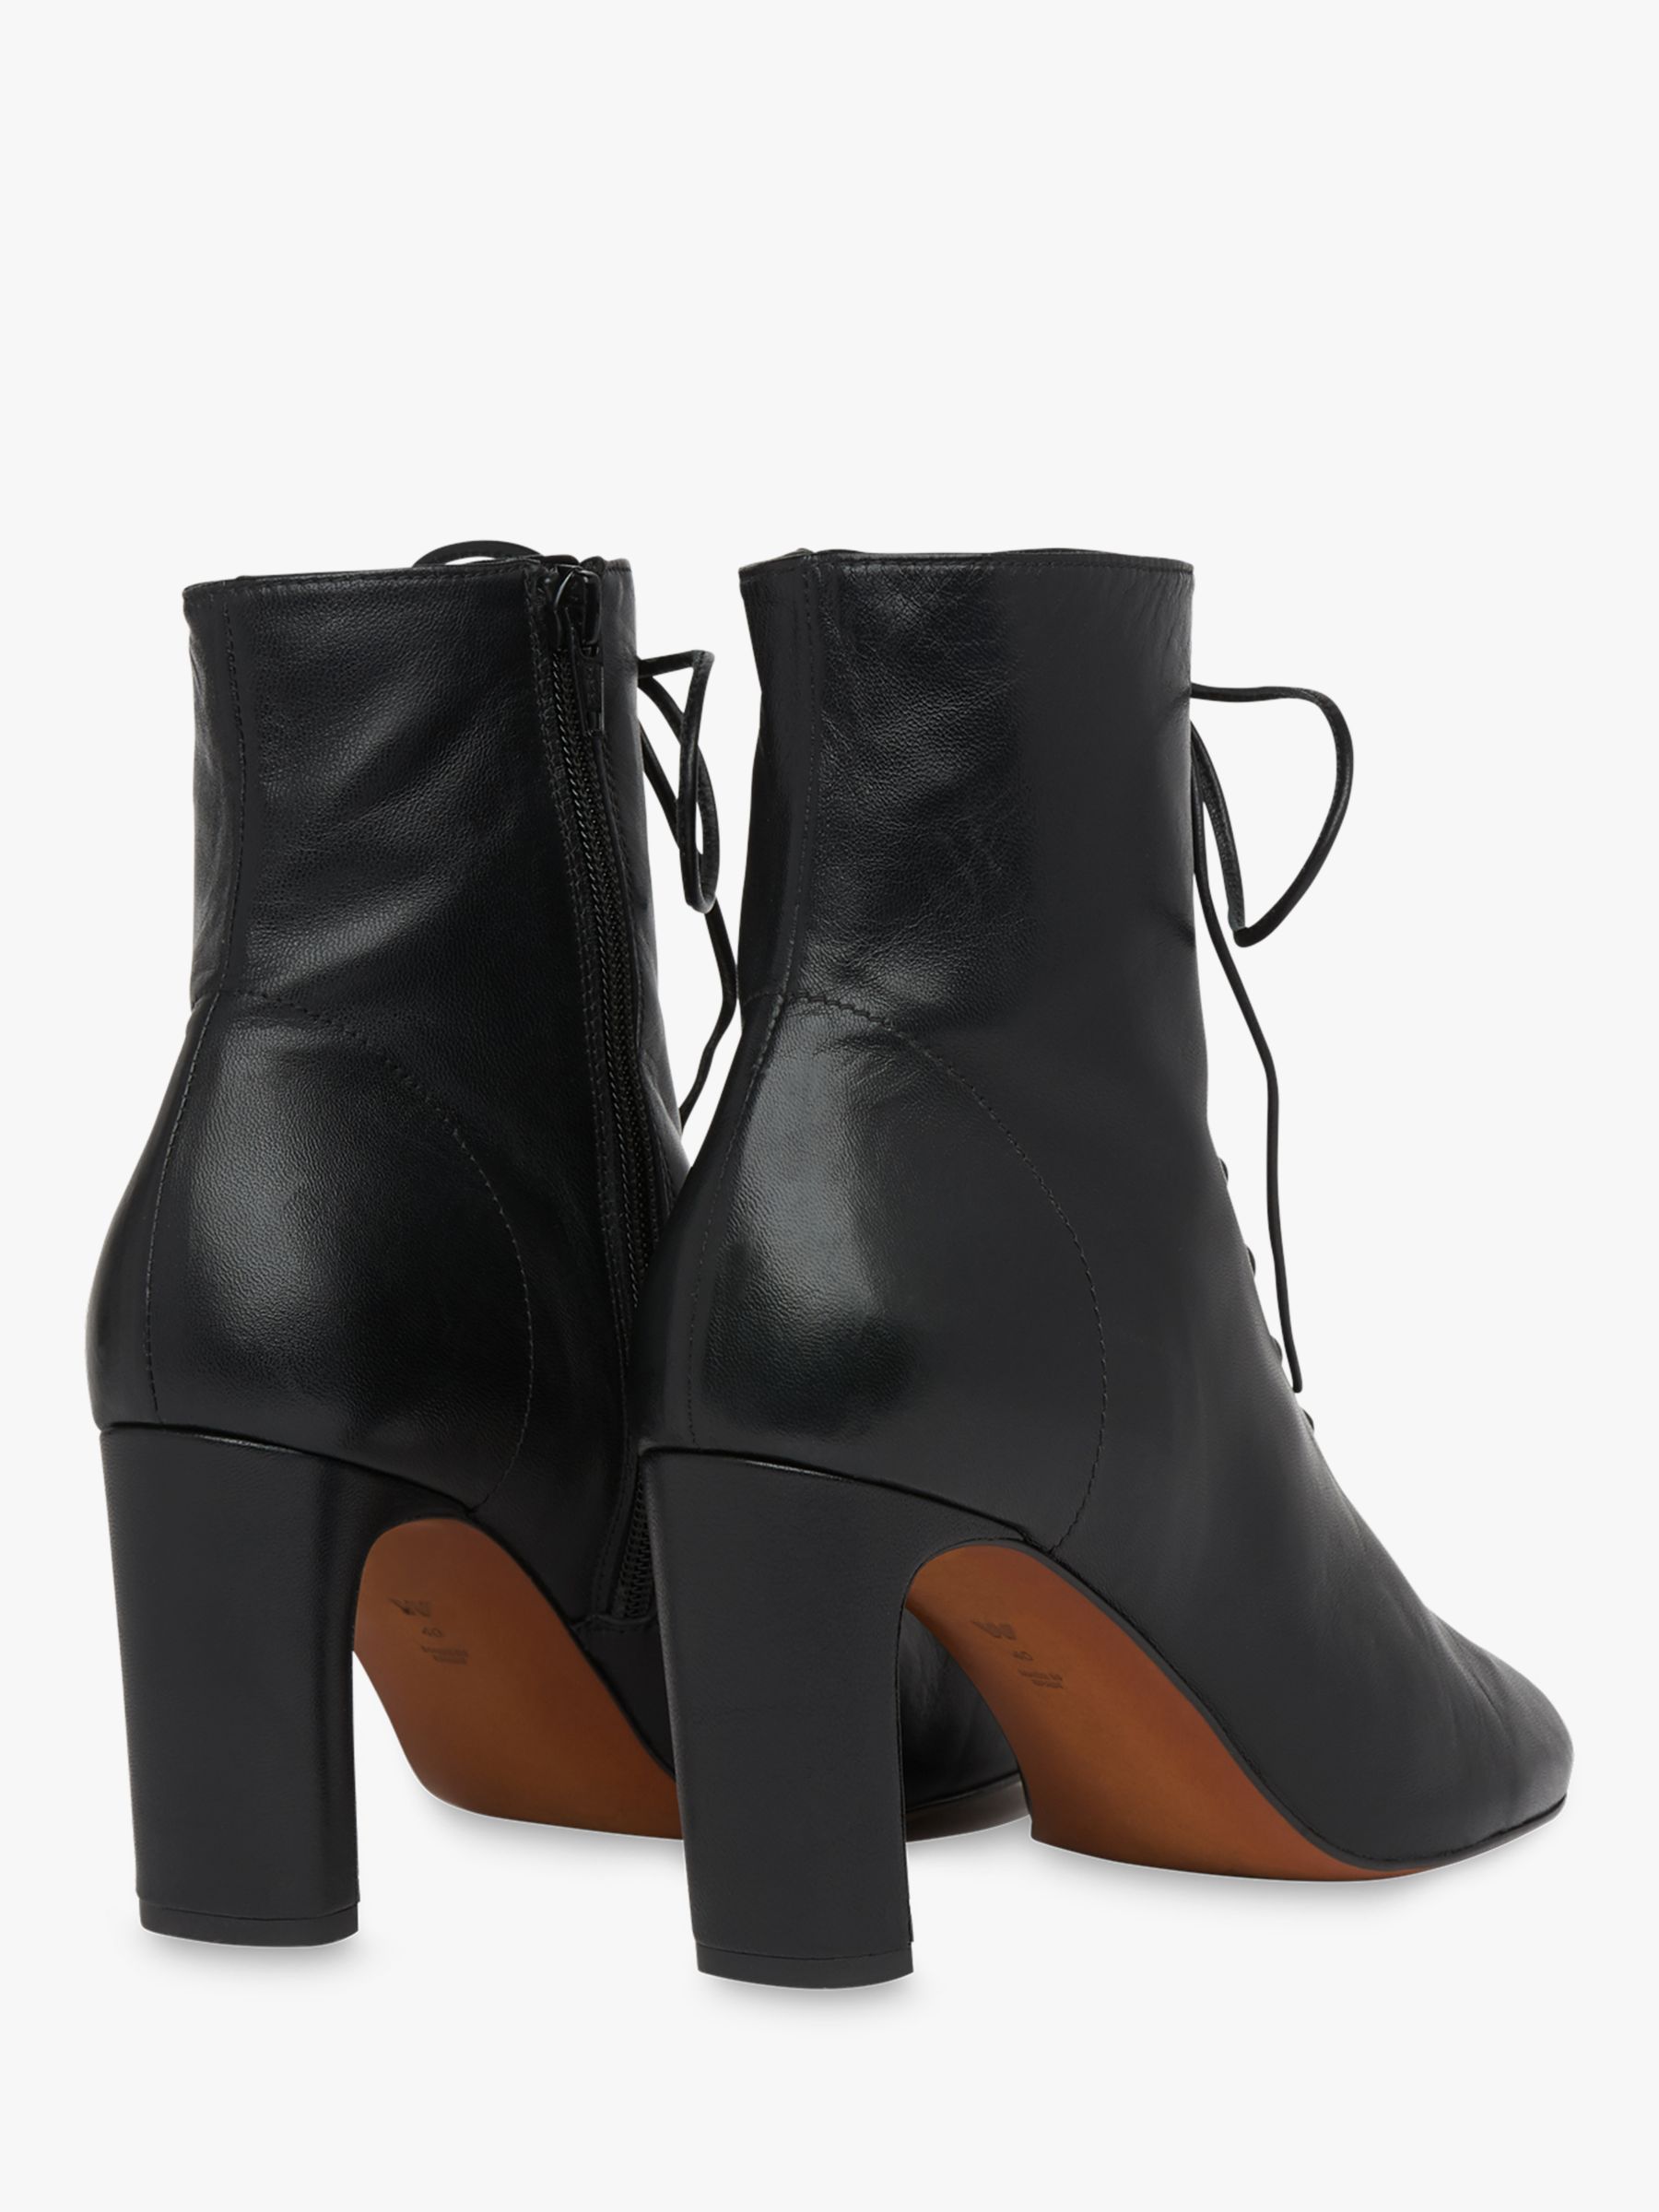 Whistles Dahlia Leather Lace Up Ankle Boots, Black at John Lewis & Partners